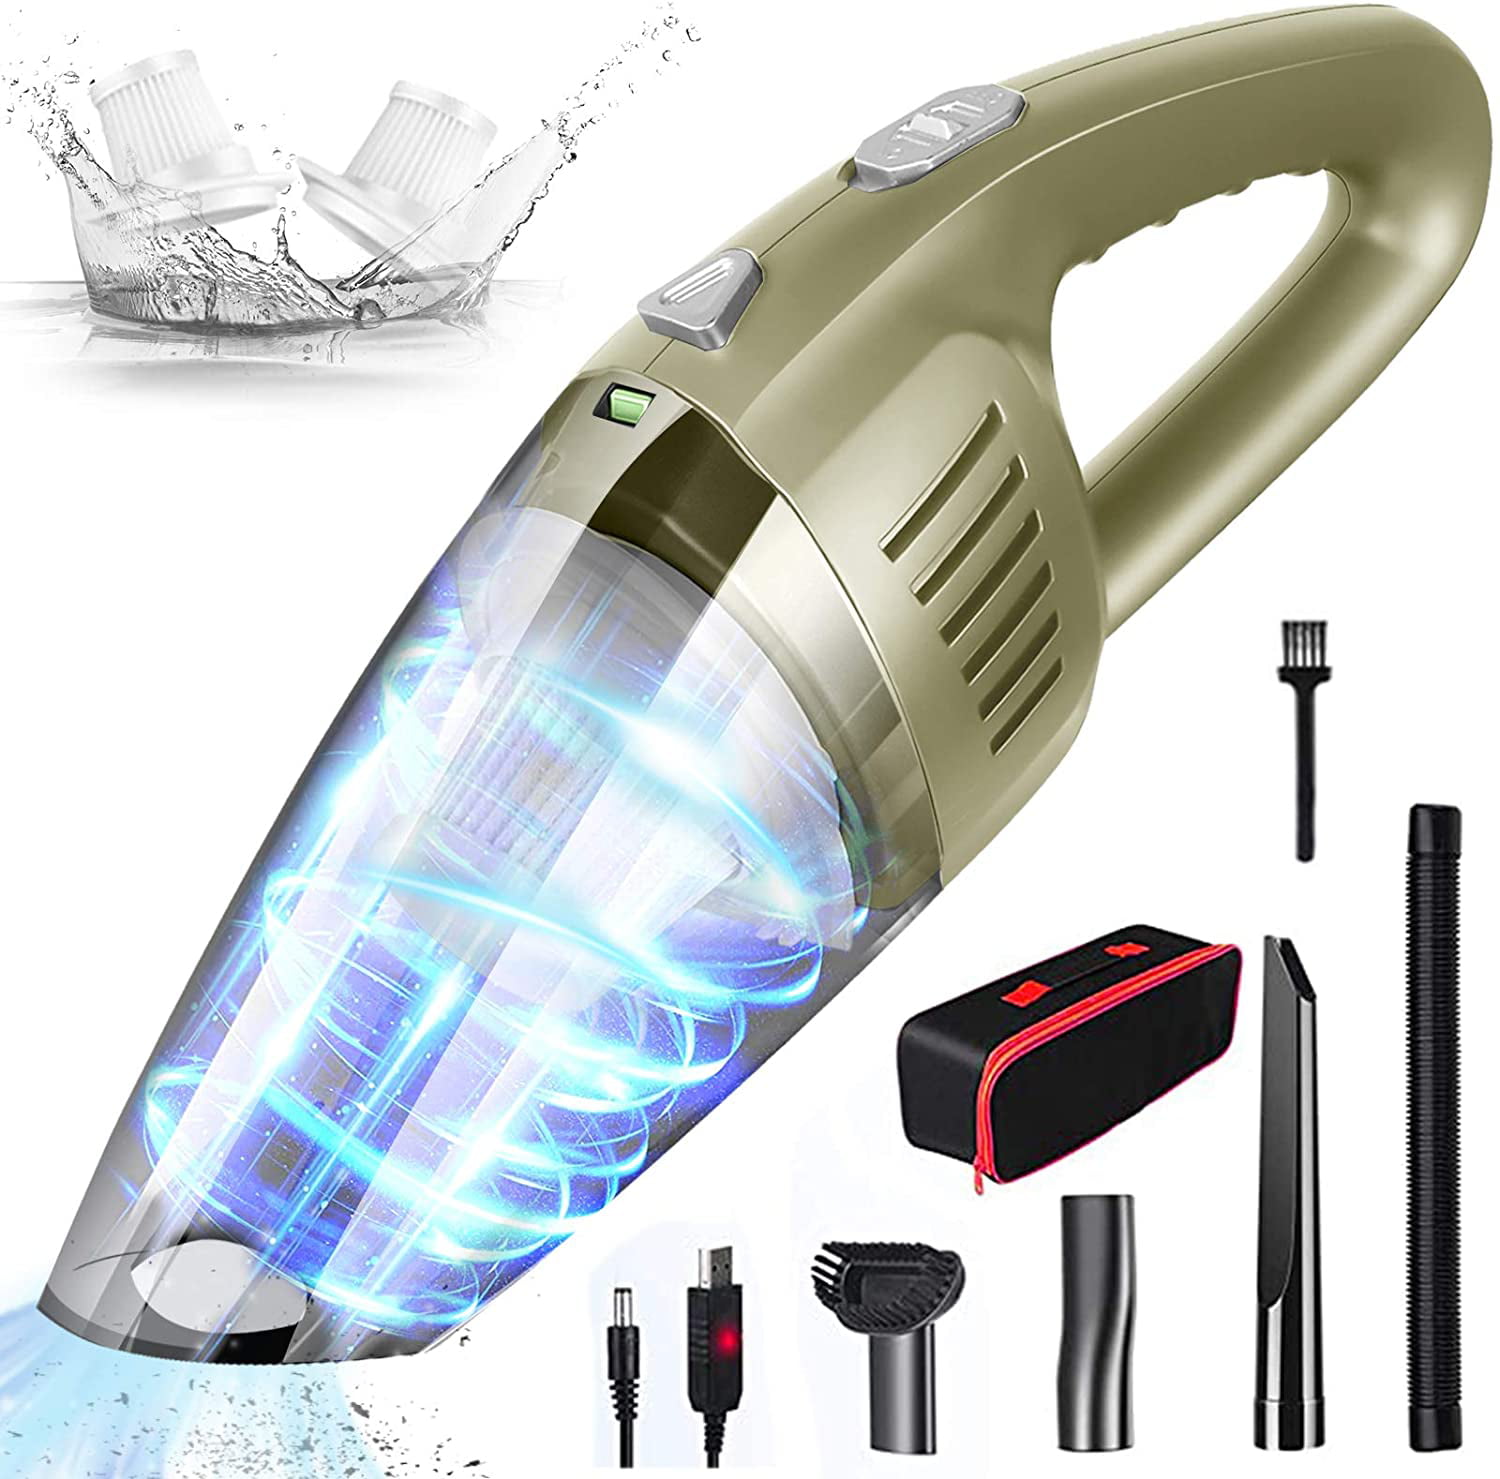 Cordless Hand Held Vacuum Cleaner Portable Car Auto Home Wireless Wet Dry 